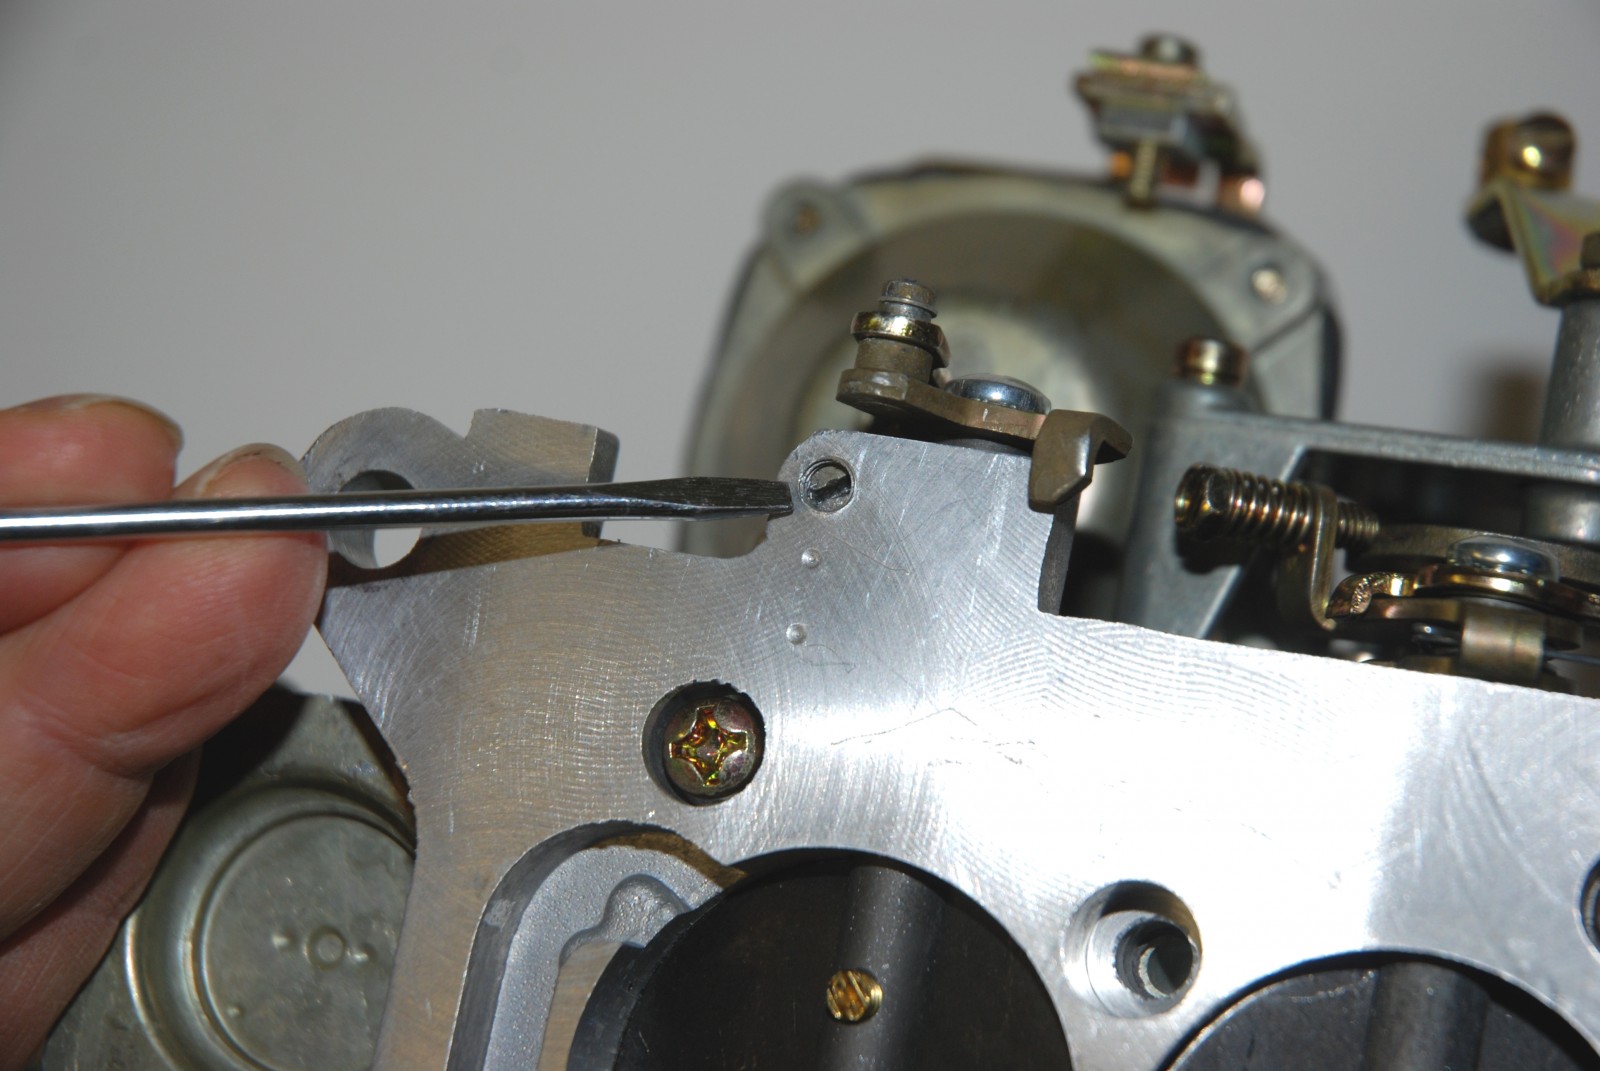 How to adjust the idle mixture screws on a Holley carburetor - Quora